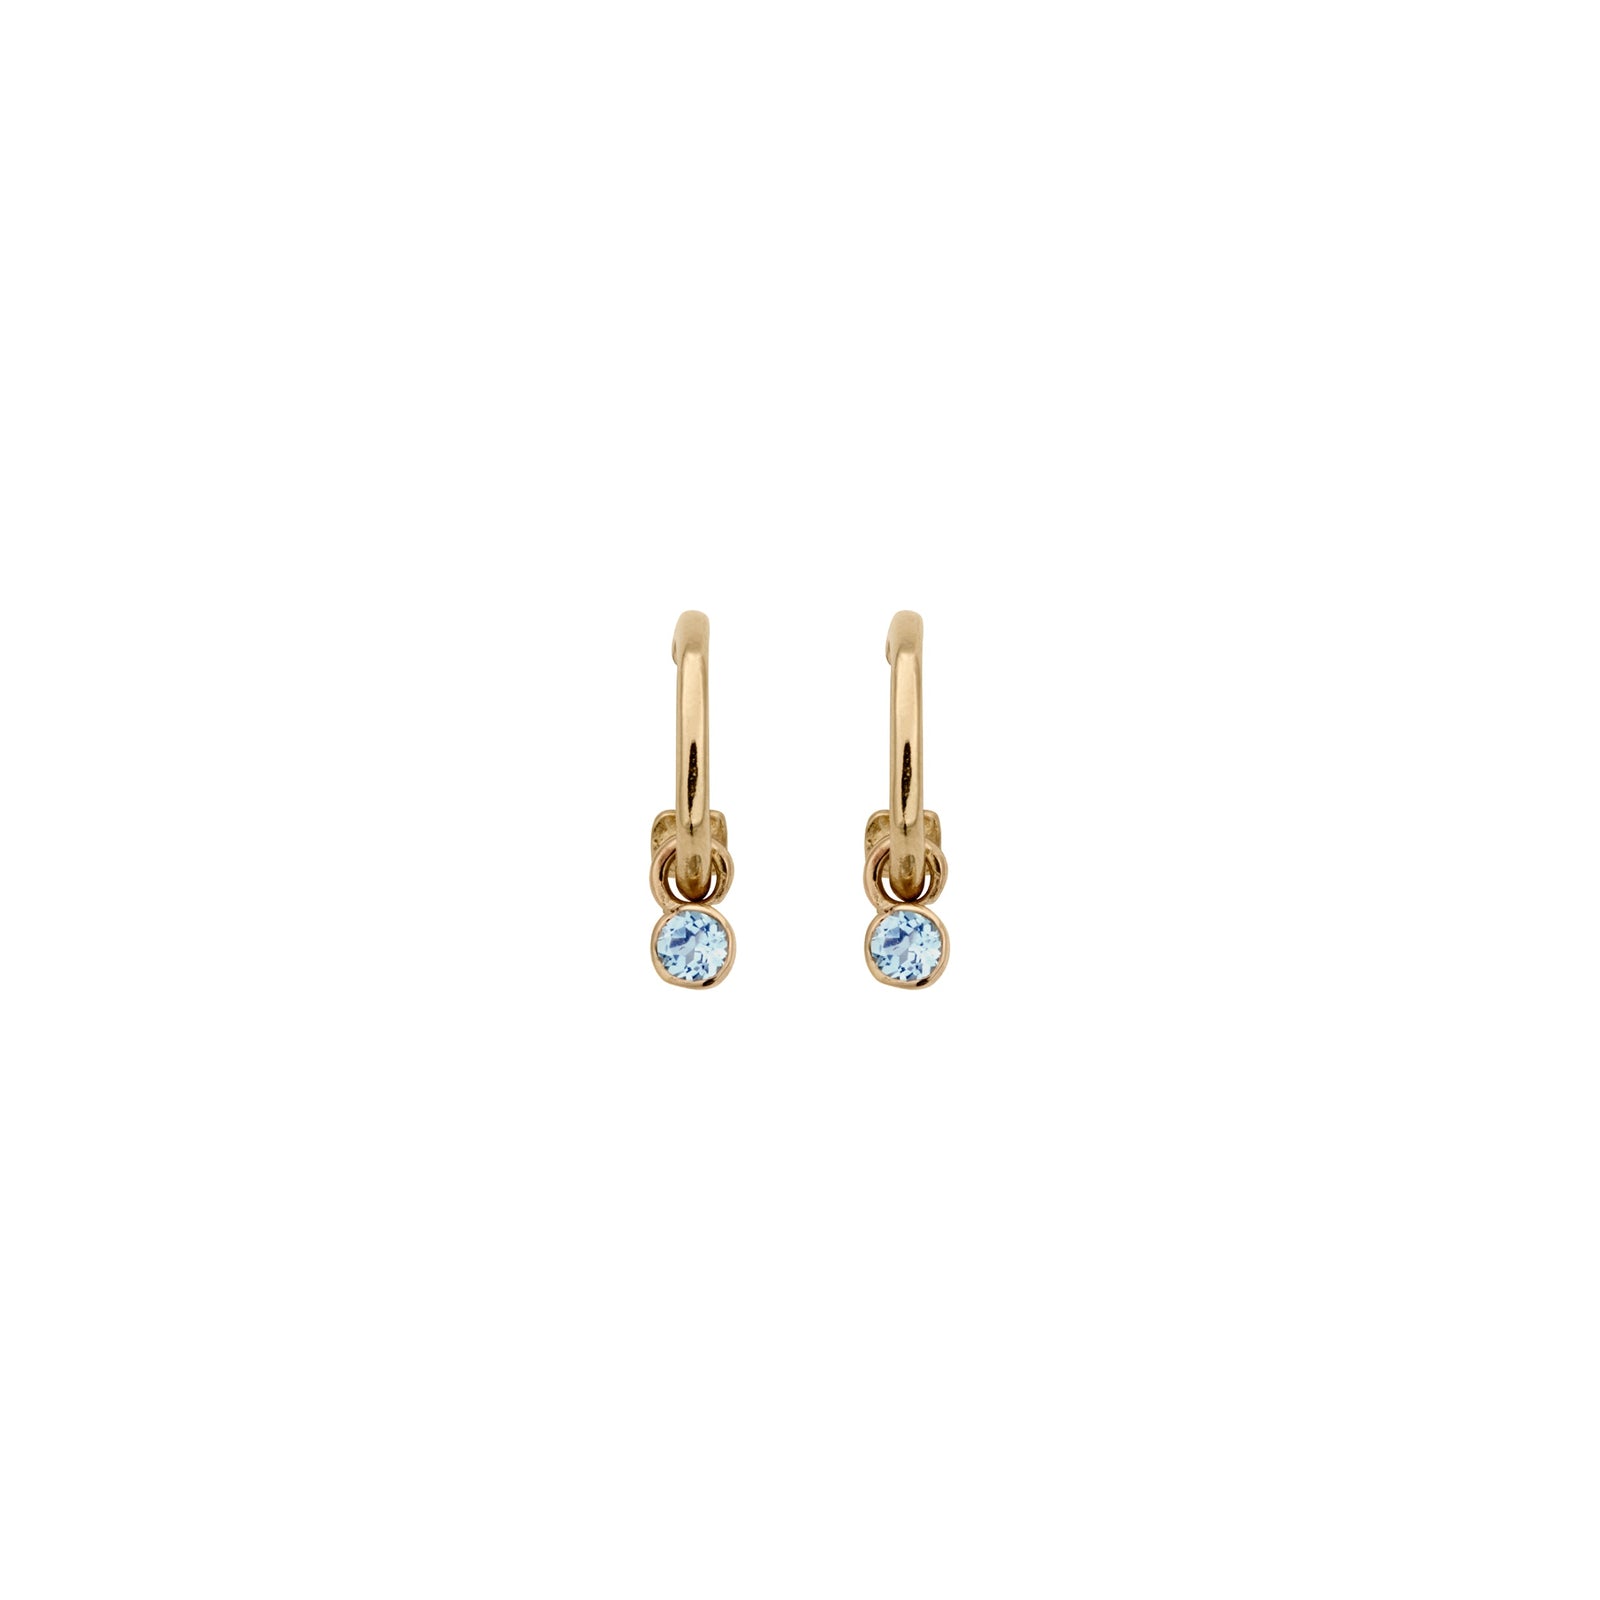 Gold Tiny Cupid Hoops with Mini Blue Topaz Earring Charms